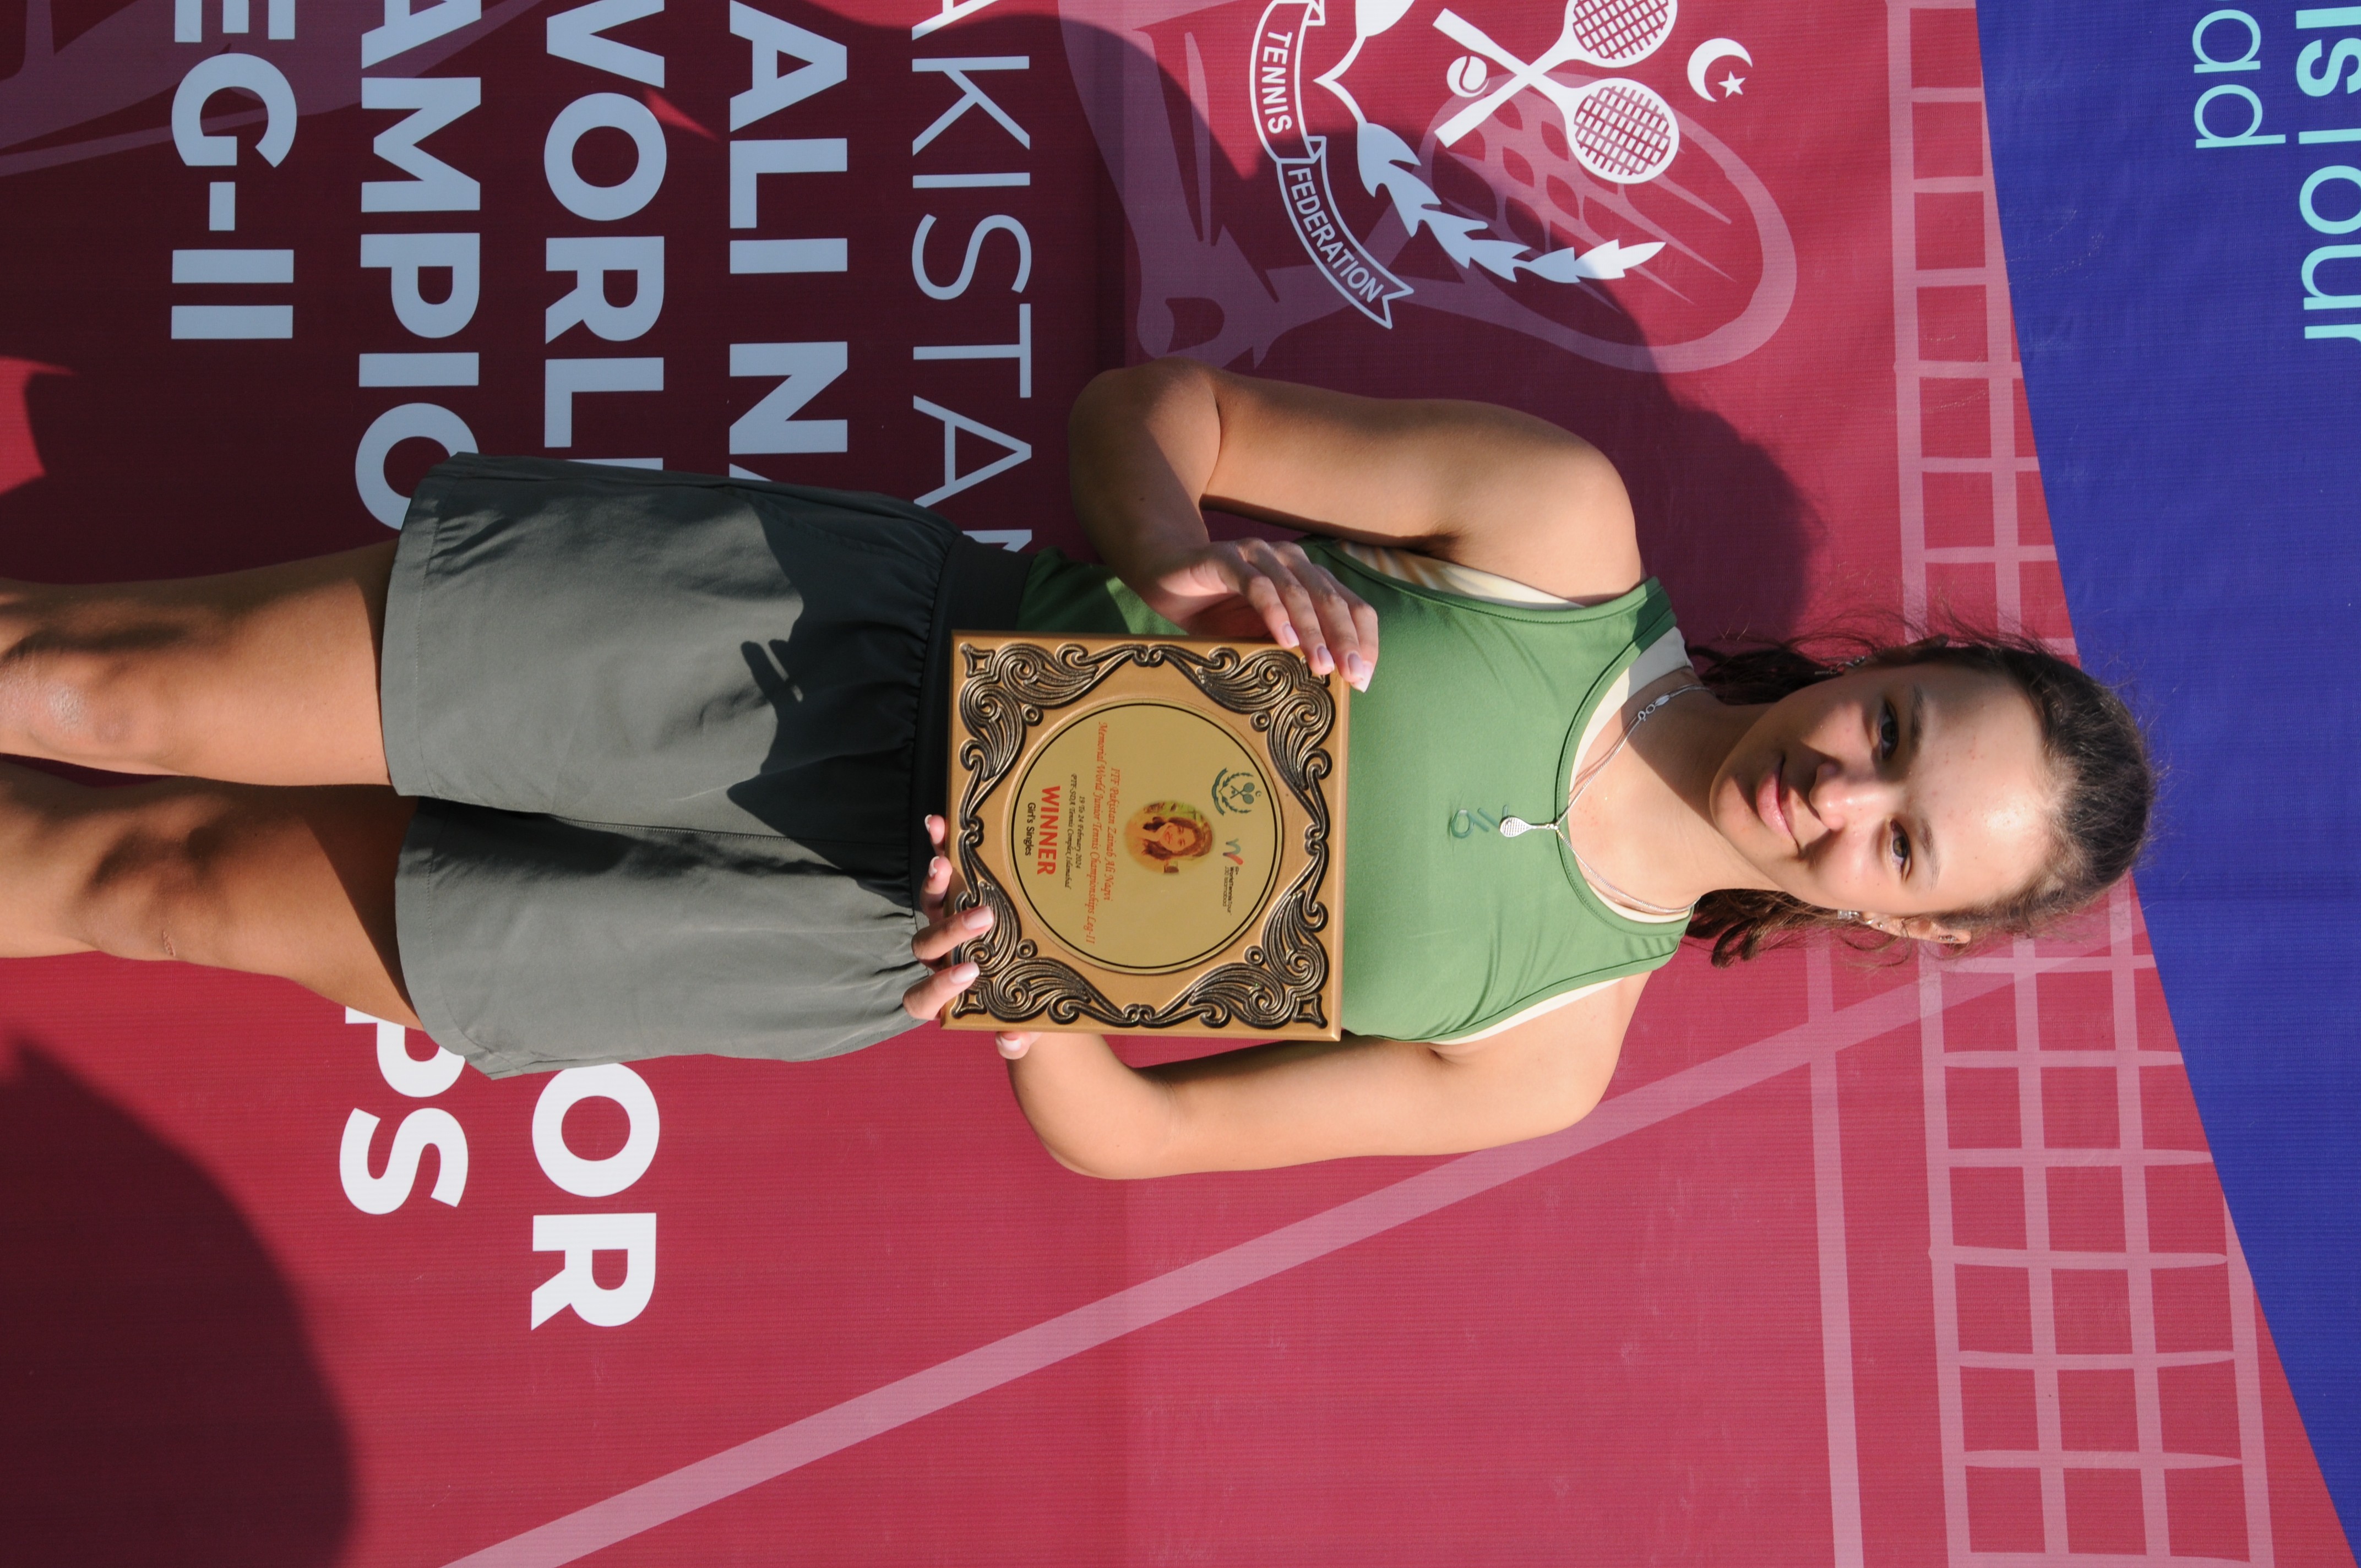 A winning tennis player posing with her trophy